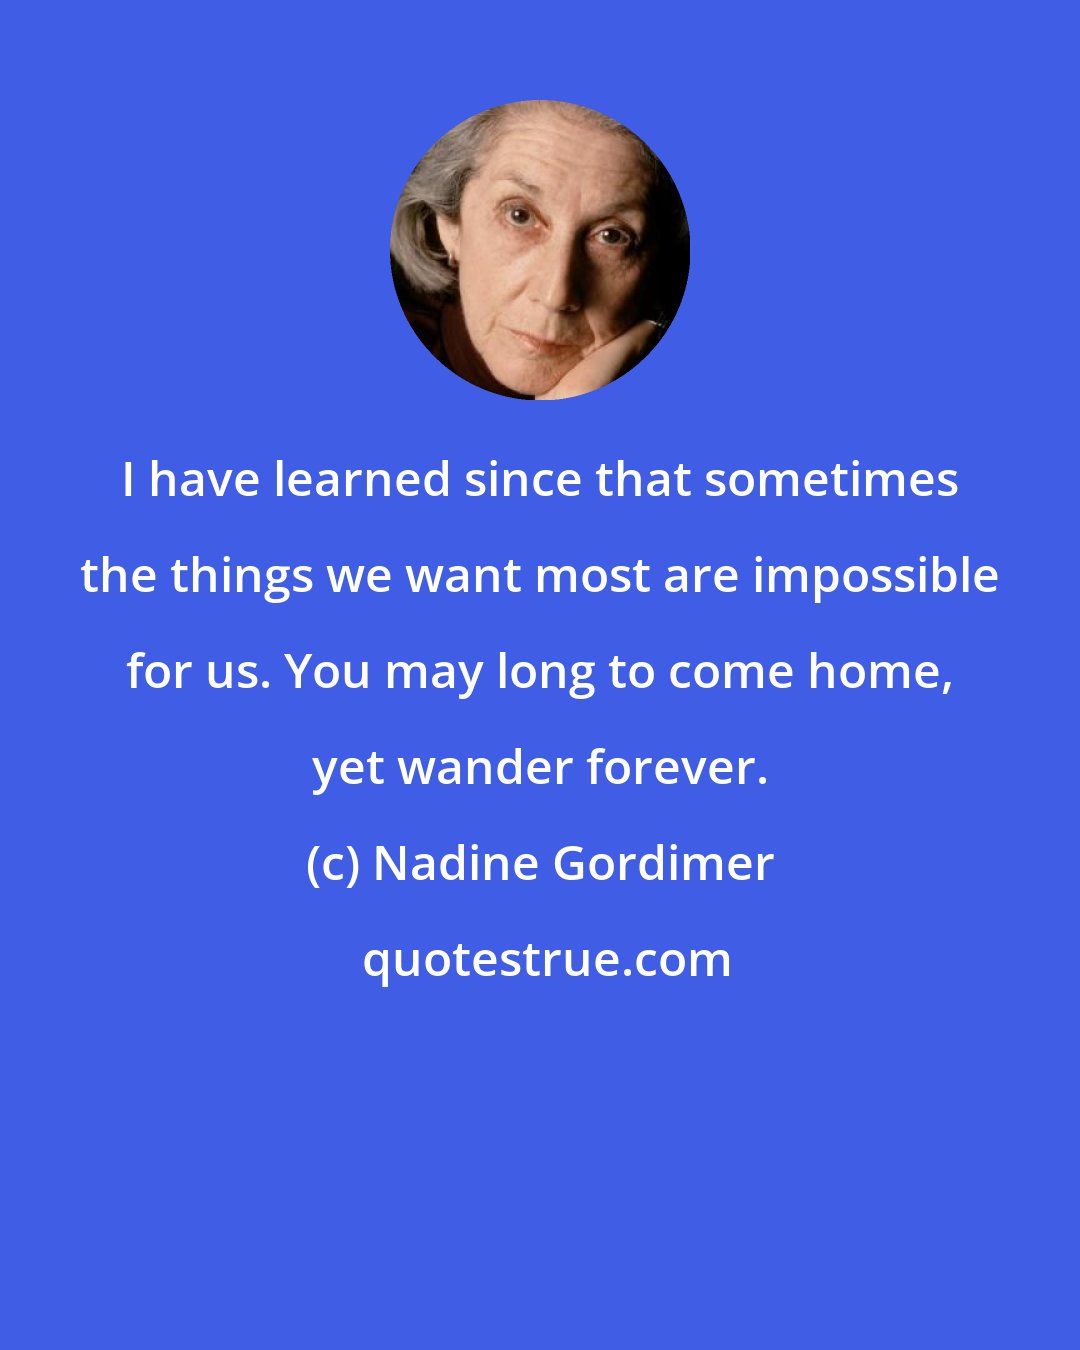 Nadine Gordimer: I have learned since that sometimes the things we want most are impossible for us. You may long to come home, yet wander forever.